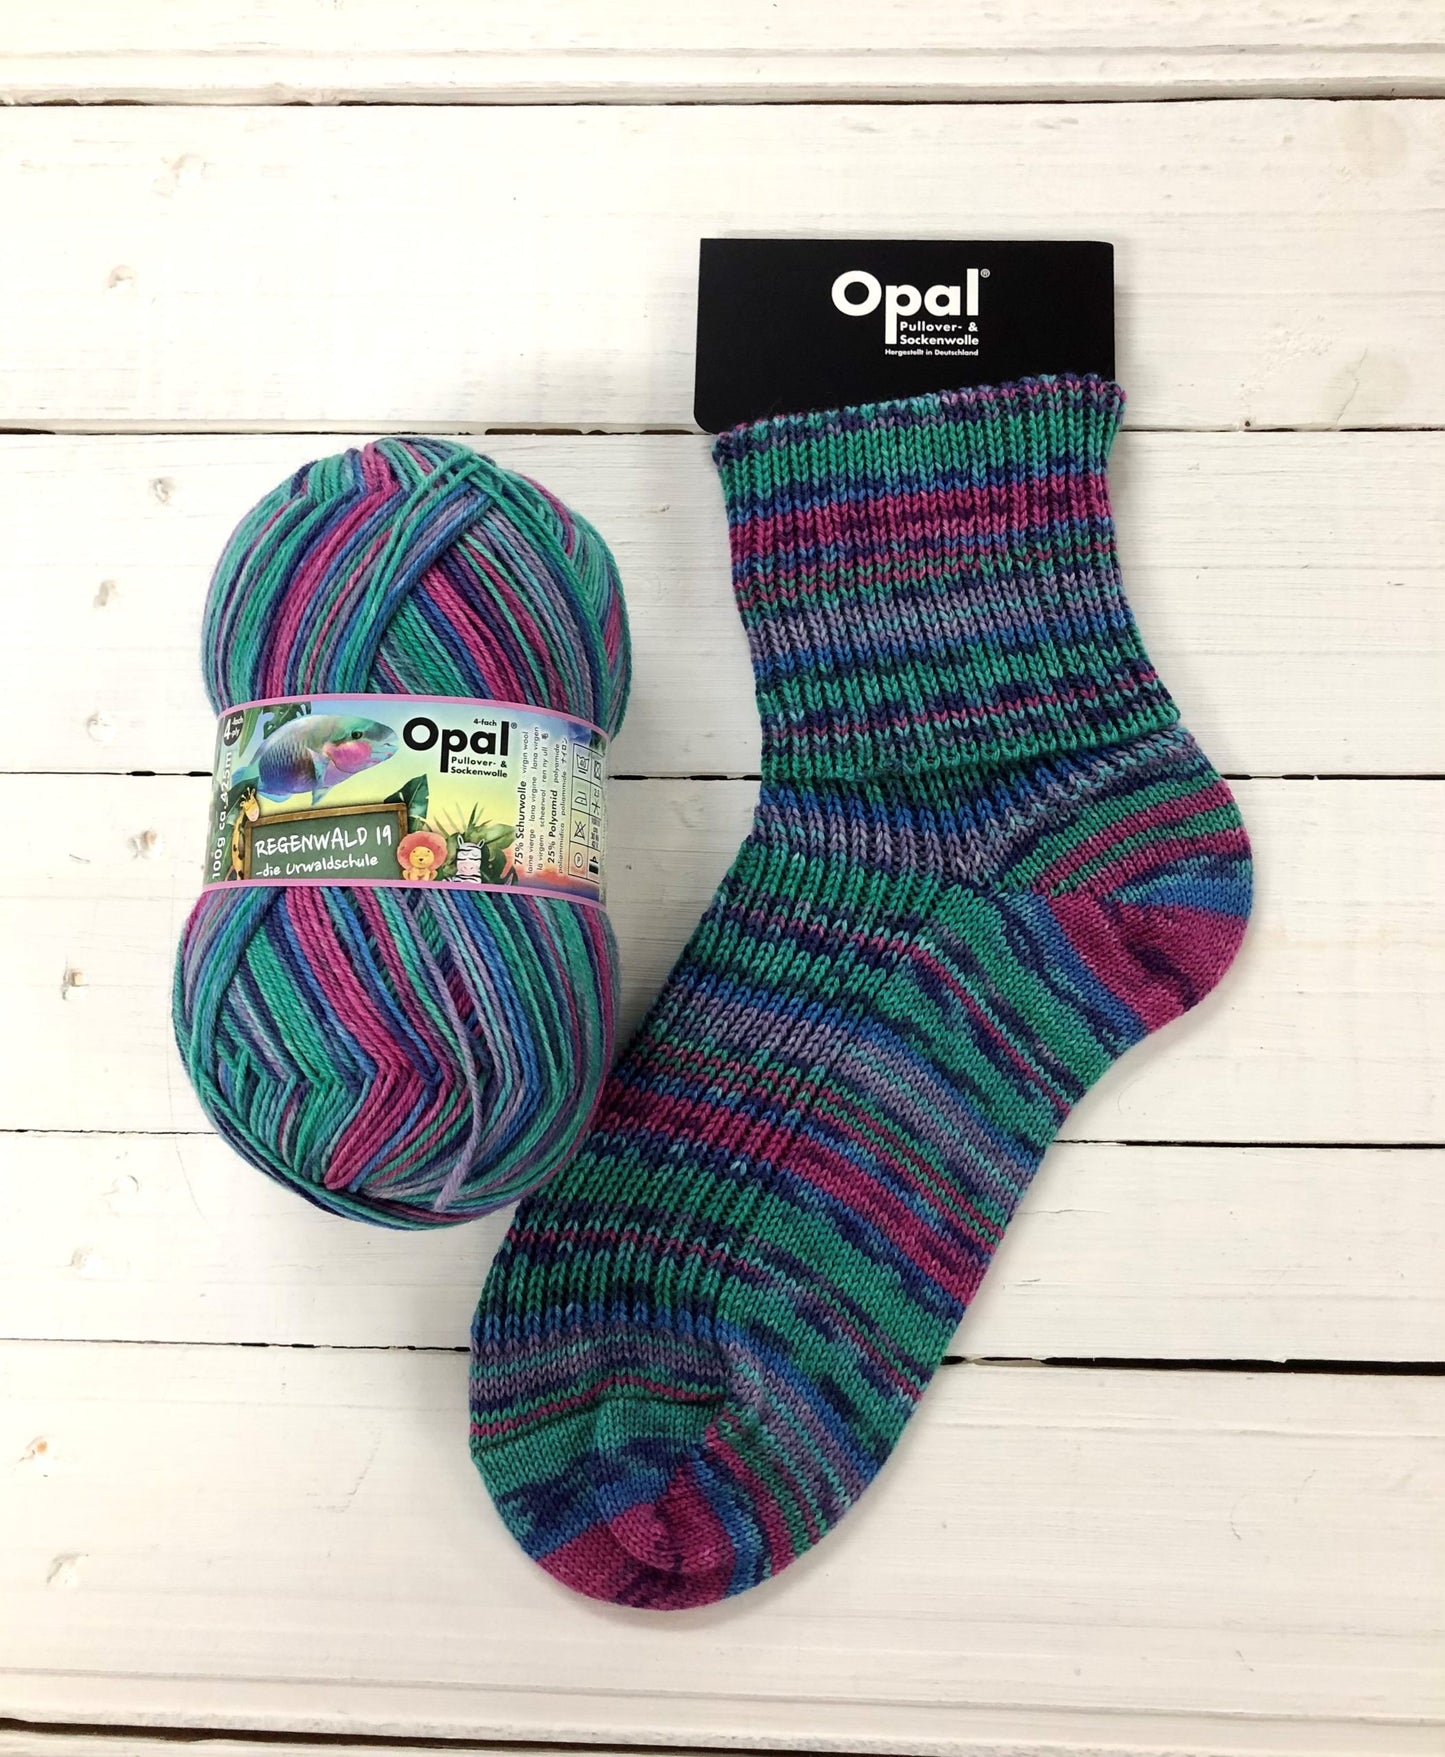 11335 - Teal, blue, fuchsia and lilac self-striping sock with black speckle.